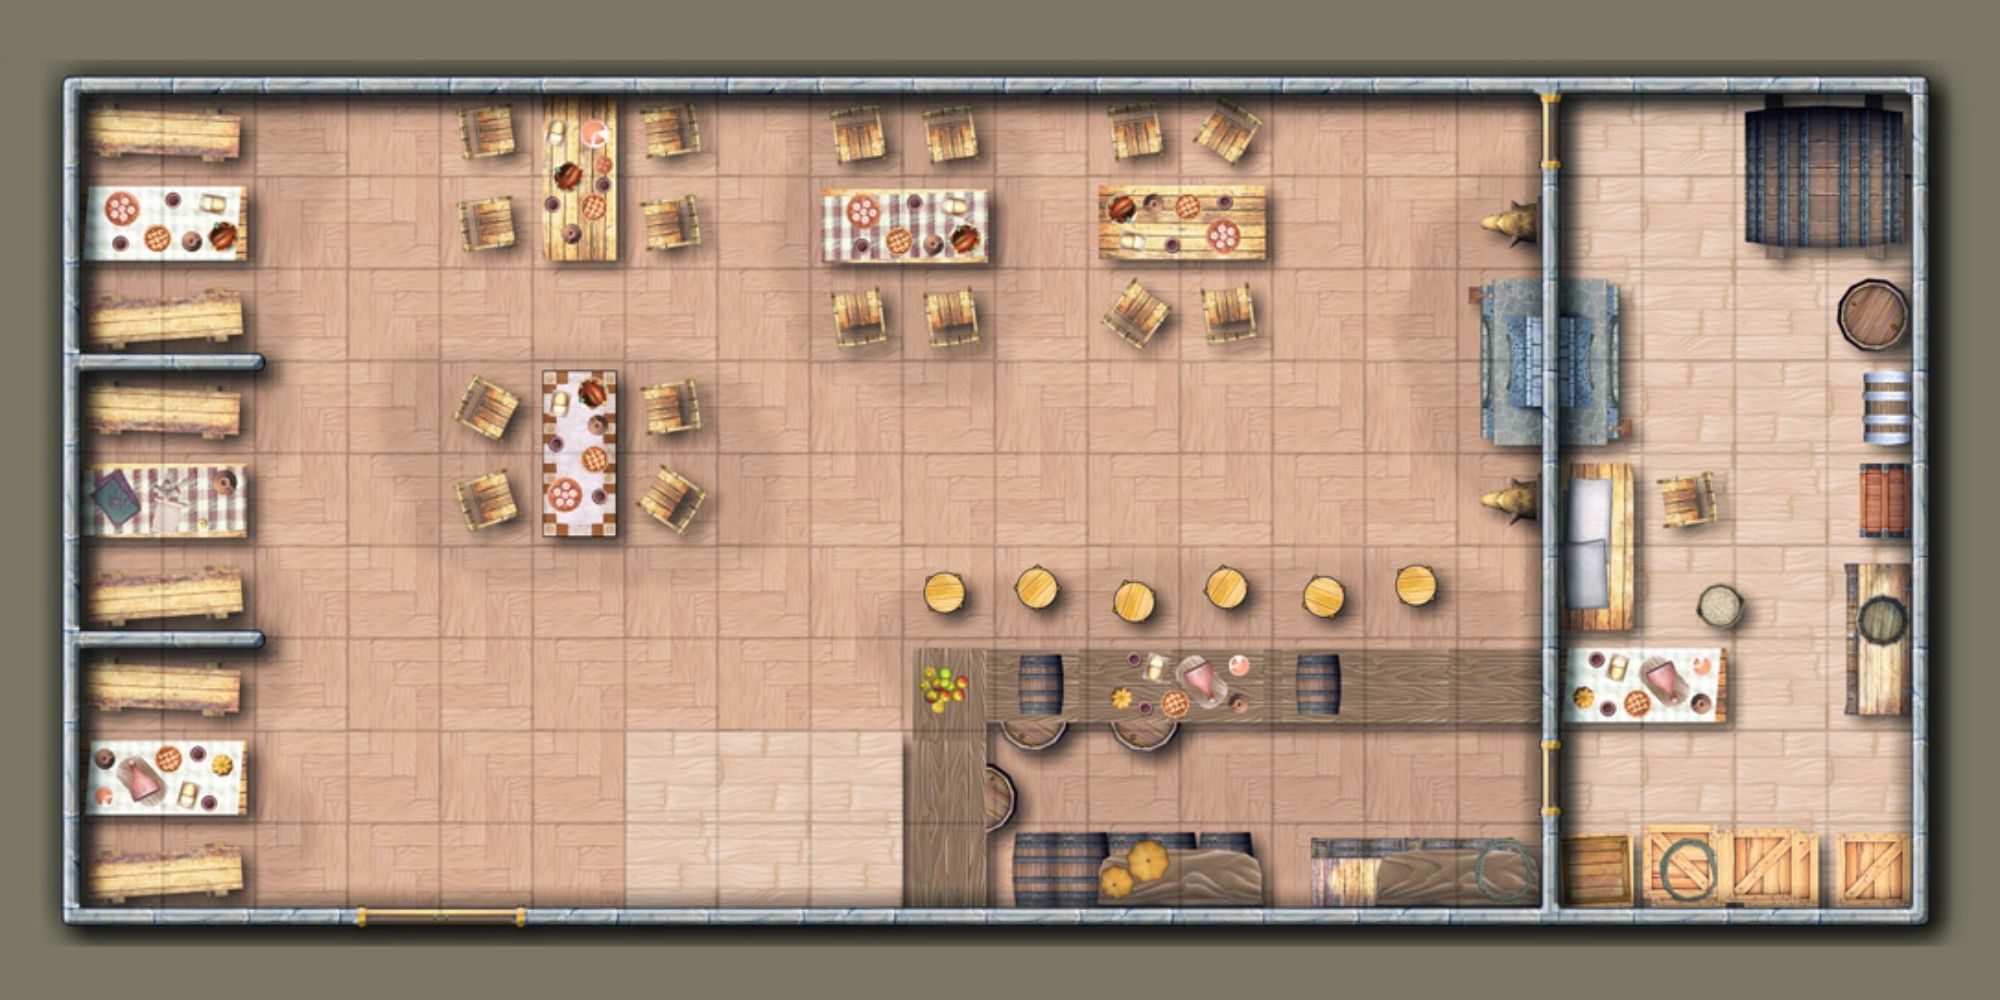 A square map of the inside of a store that looks like an izakaya, with a kitchen and lots of tables